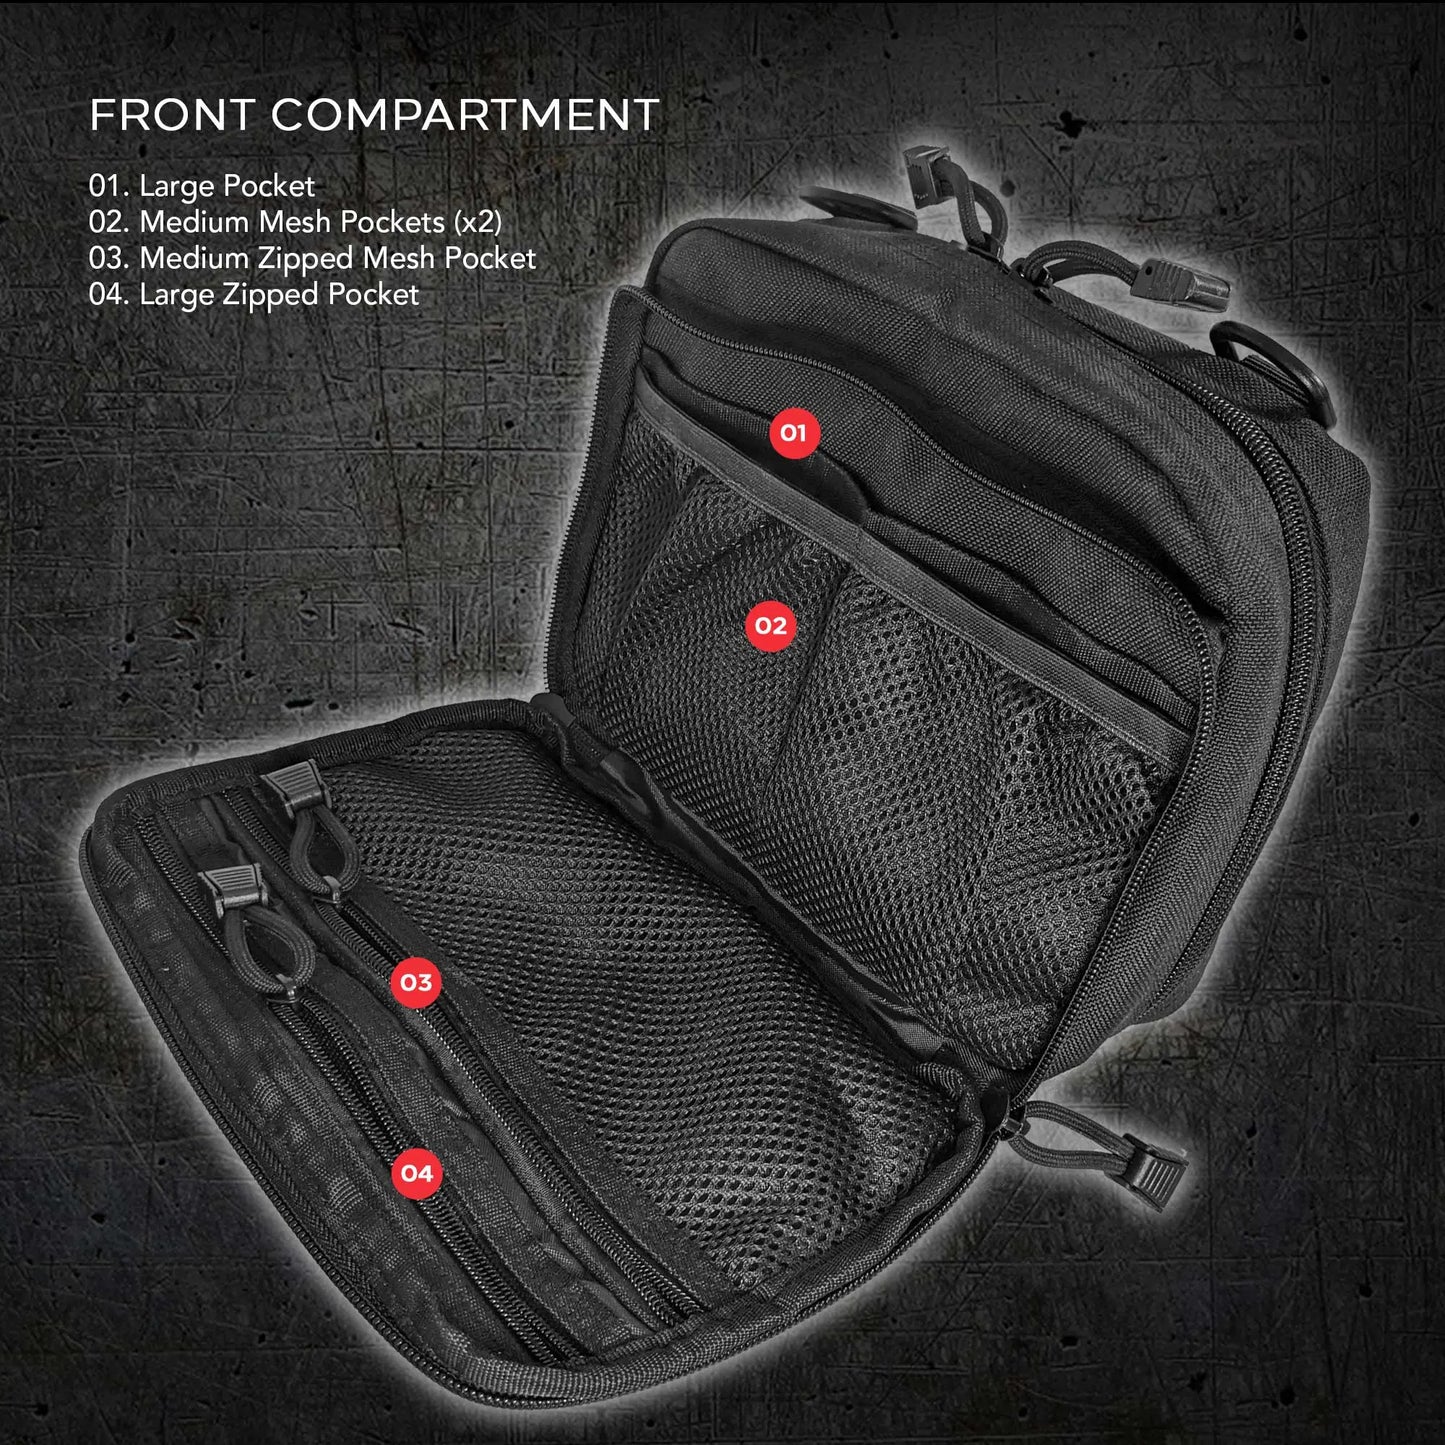 Excursion Tactical Gear Travel Backpack - Molle Bag Pouch Backpack Organizer Bug Out Bag Survival Kit First Aid Day Pack